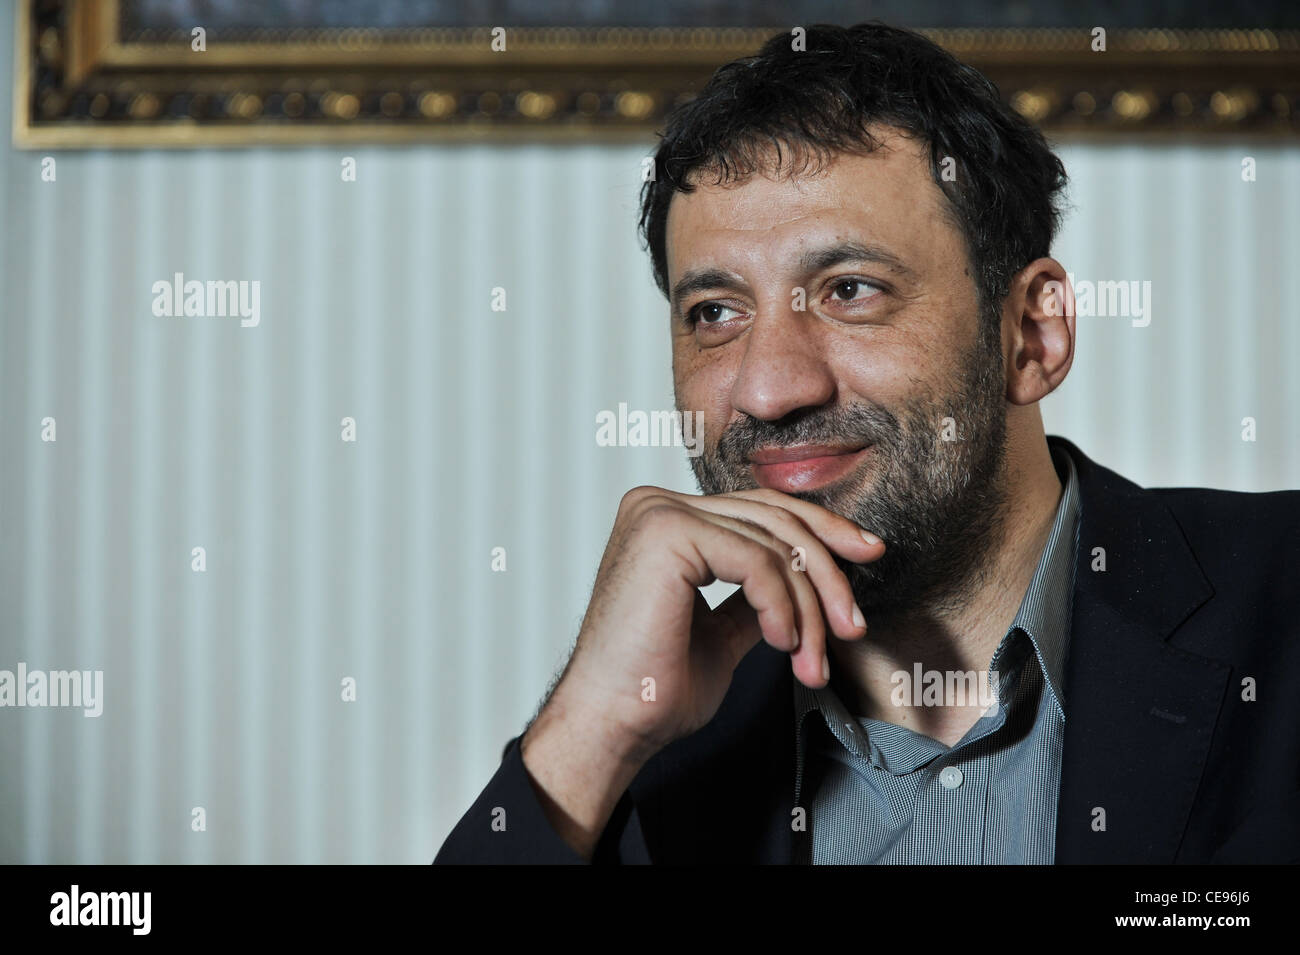 Vlade Divac a retired Yugoslav and Serbian professional basketball player who spent most of his career in the NBA. Stock Photo